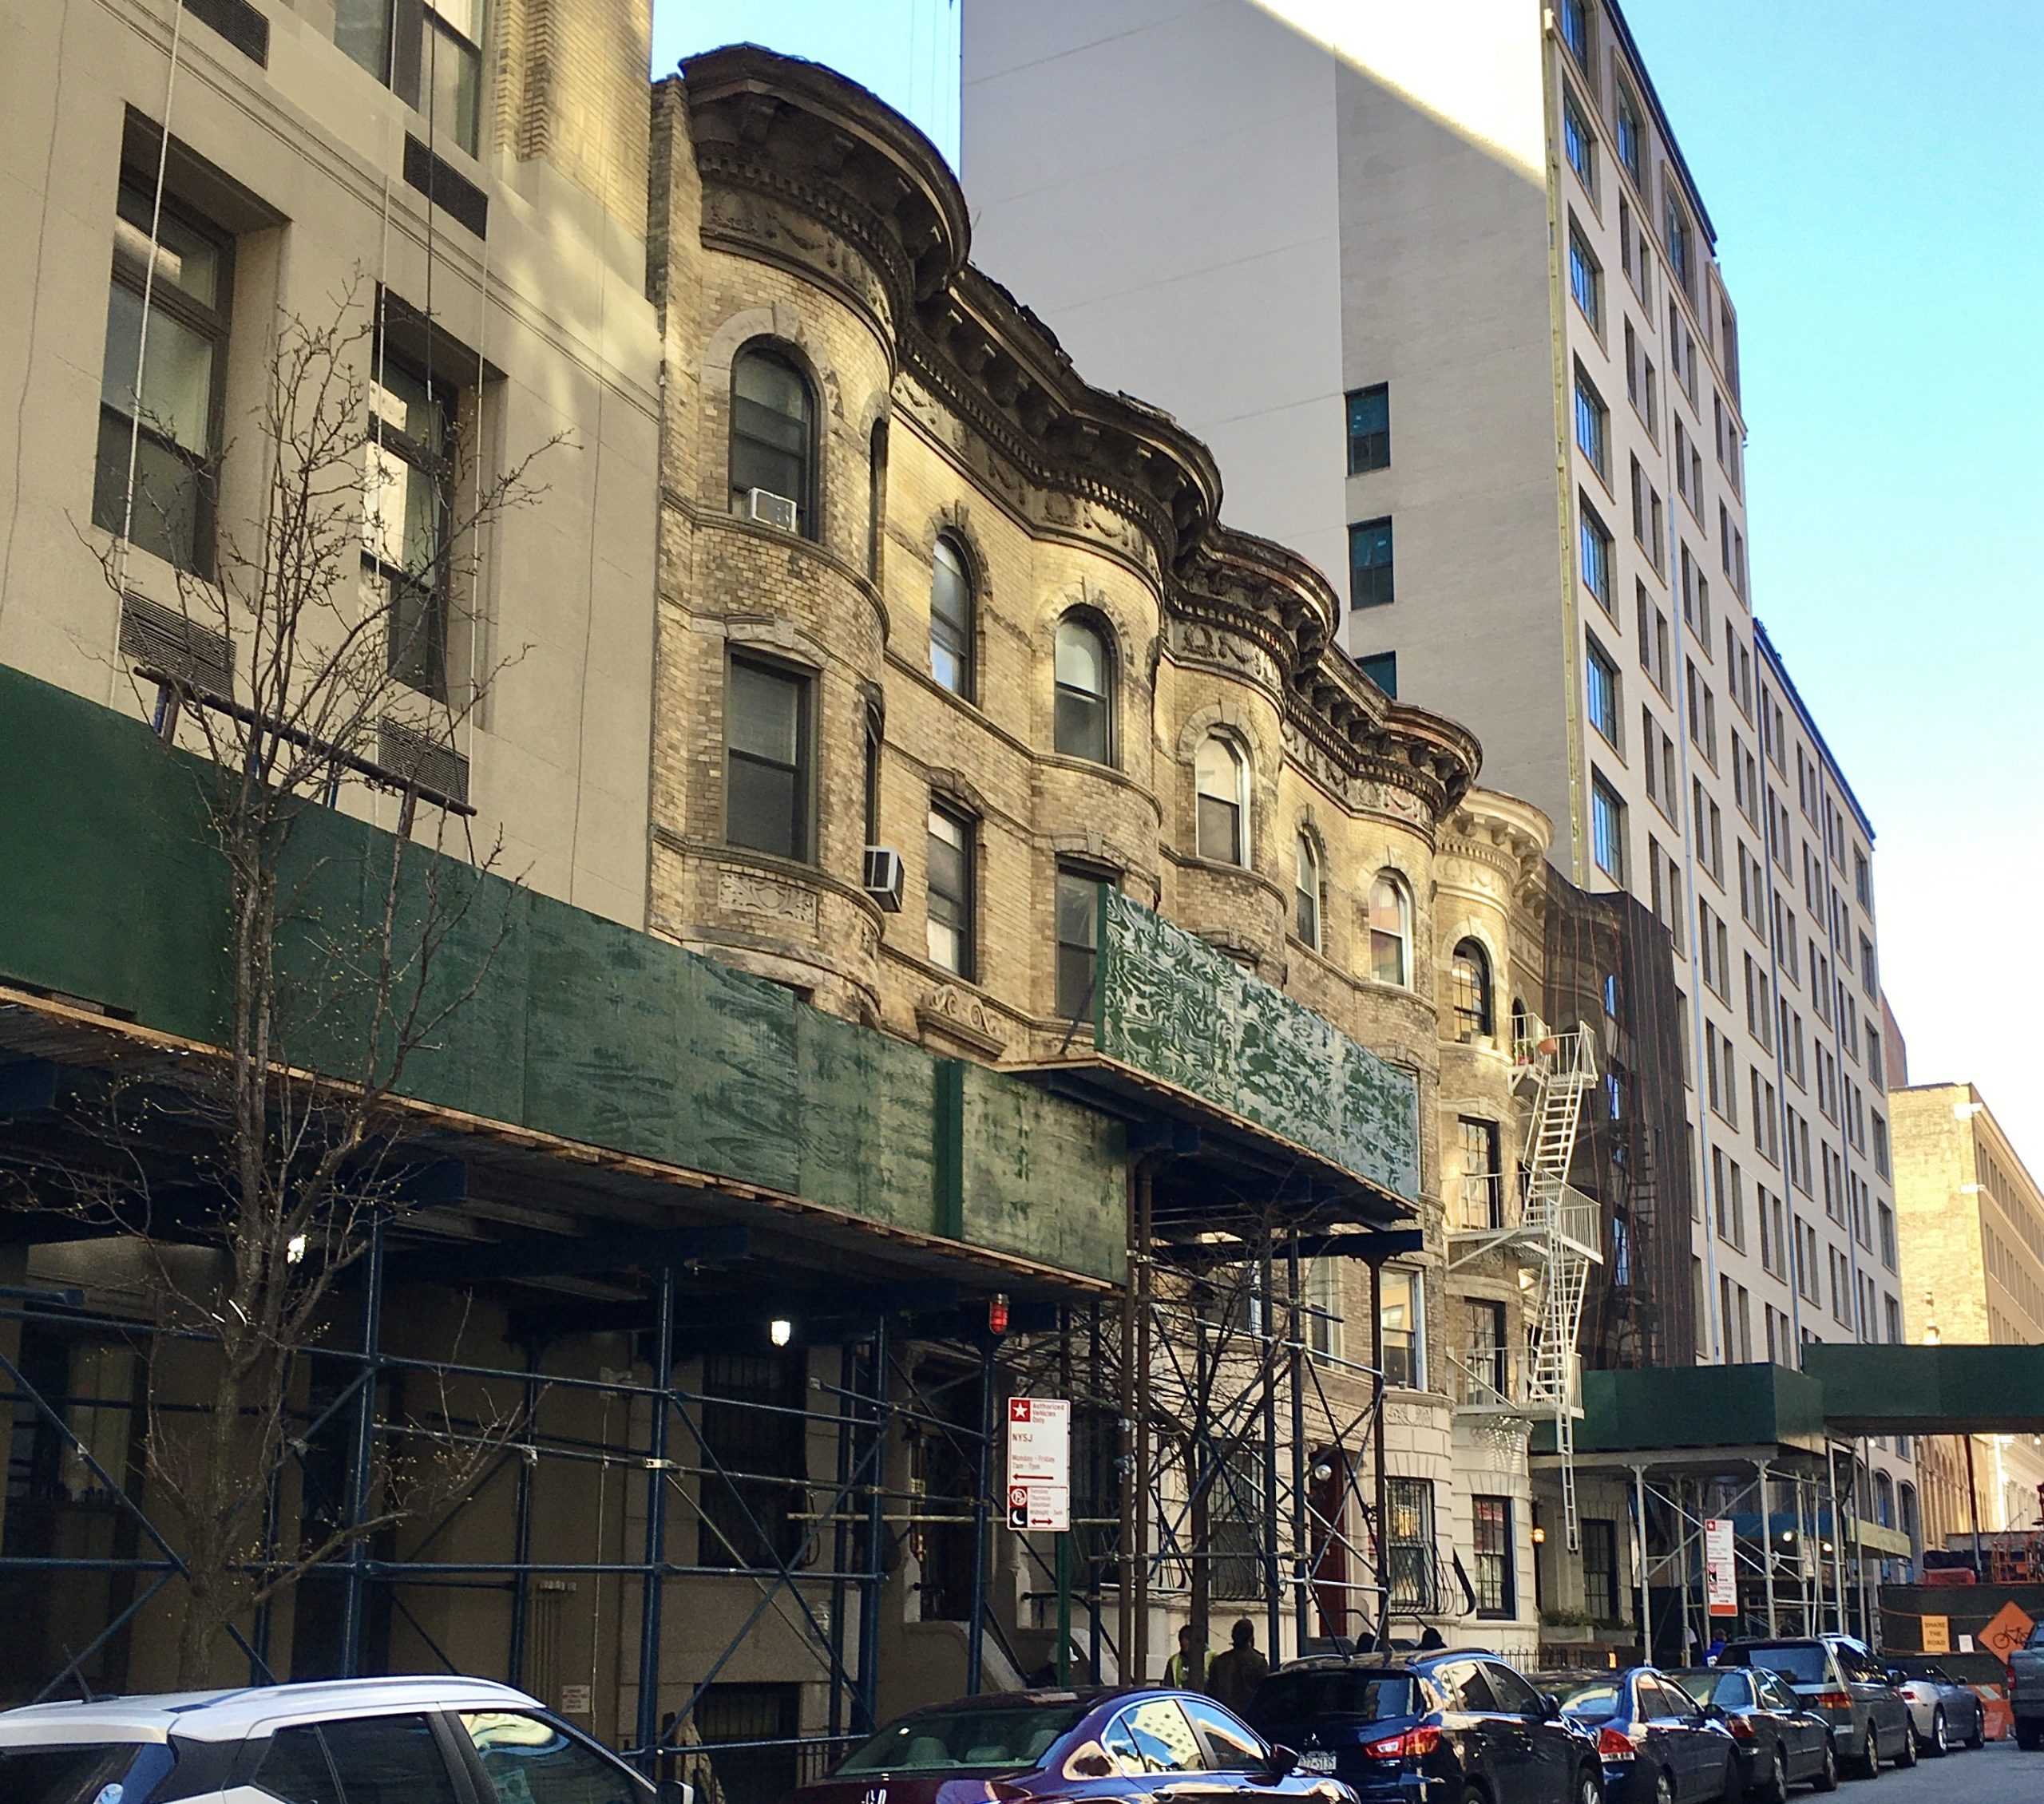 The townhouse at left is 88 Schermerhorn St., which a developer plans to demolish for hotel construction. Photo: Lore Croghan/Brooklyn Eagle